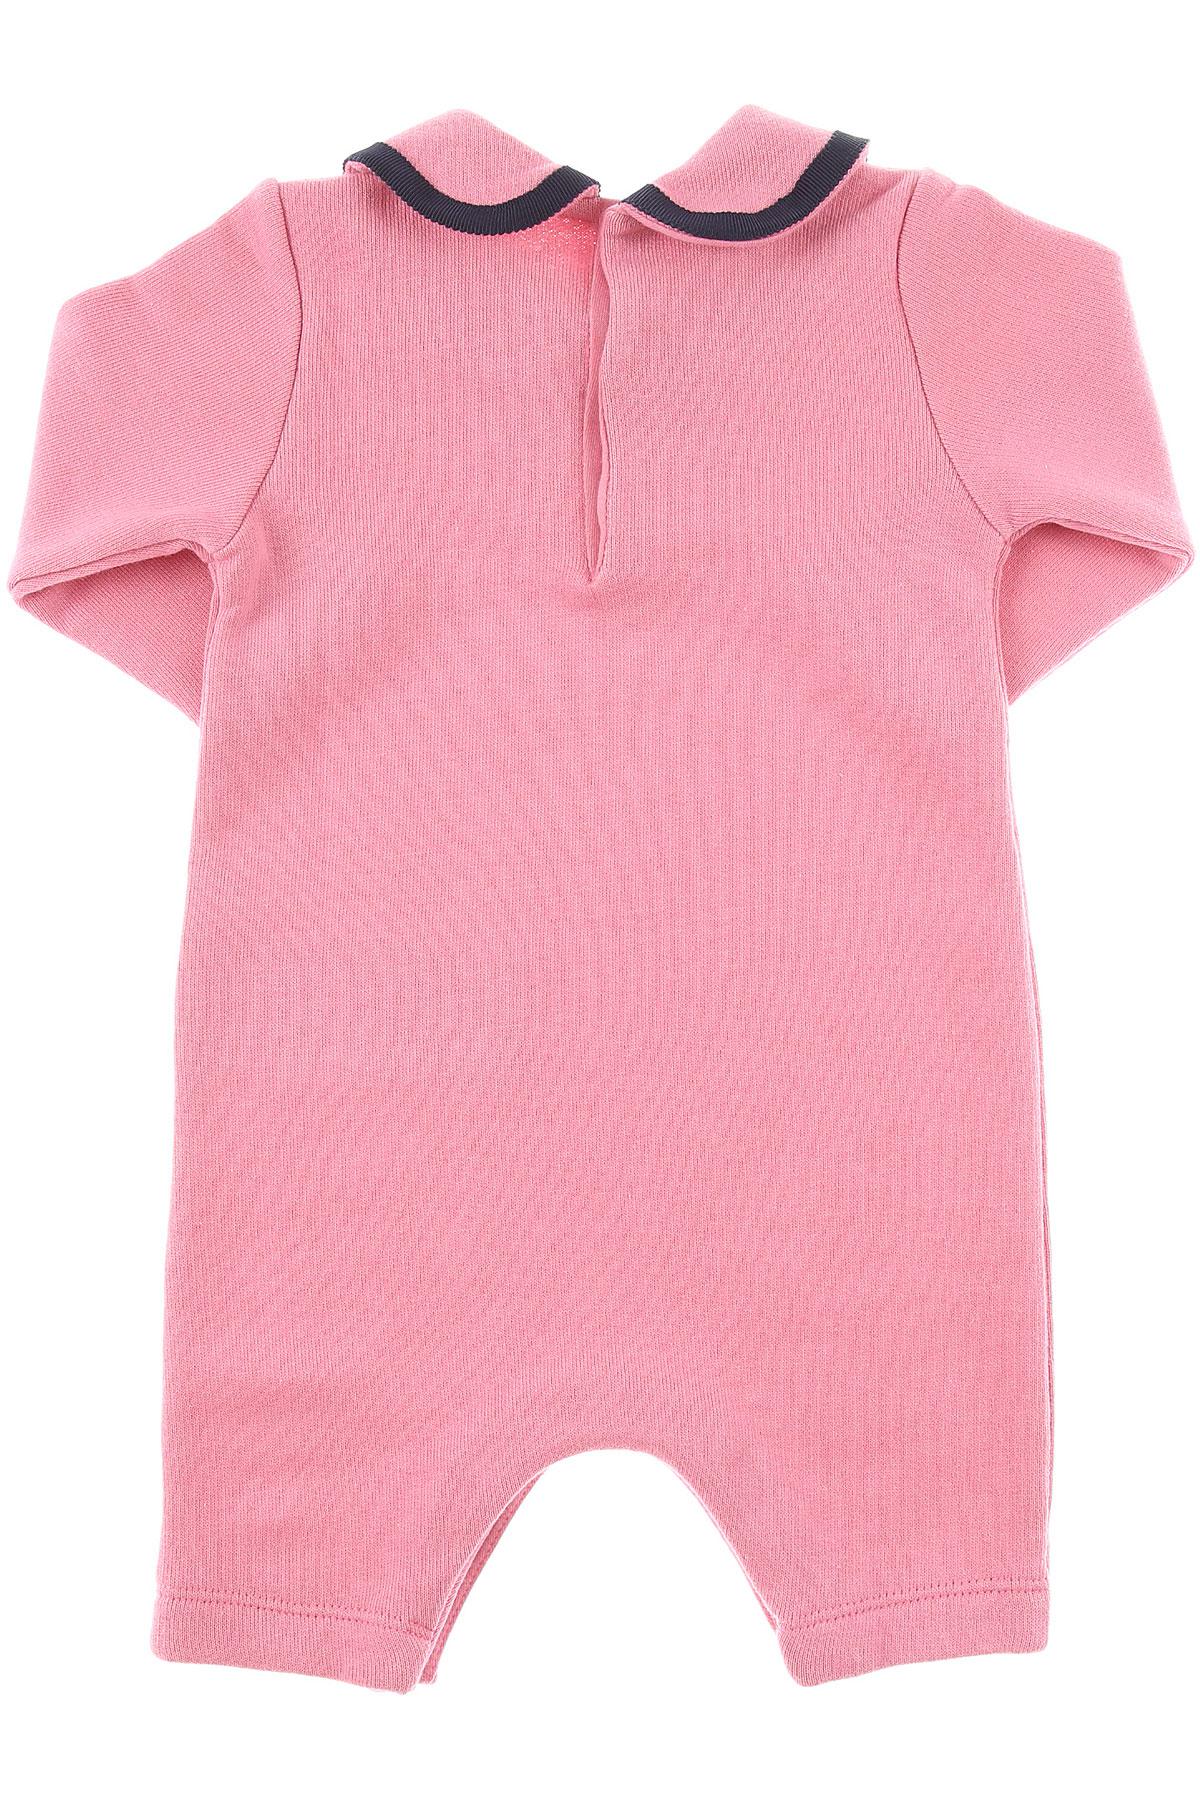 Gucci Cotton Baby Girl Clothing On Sale 